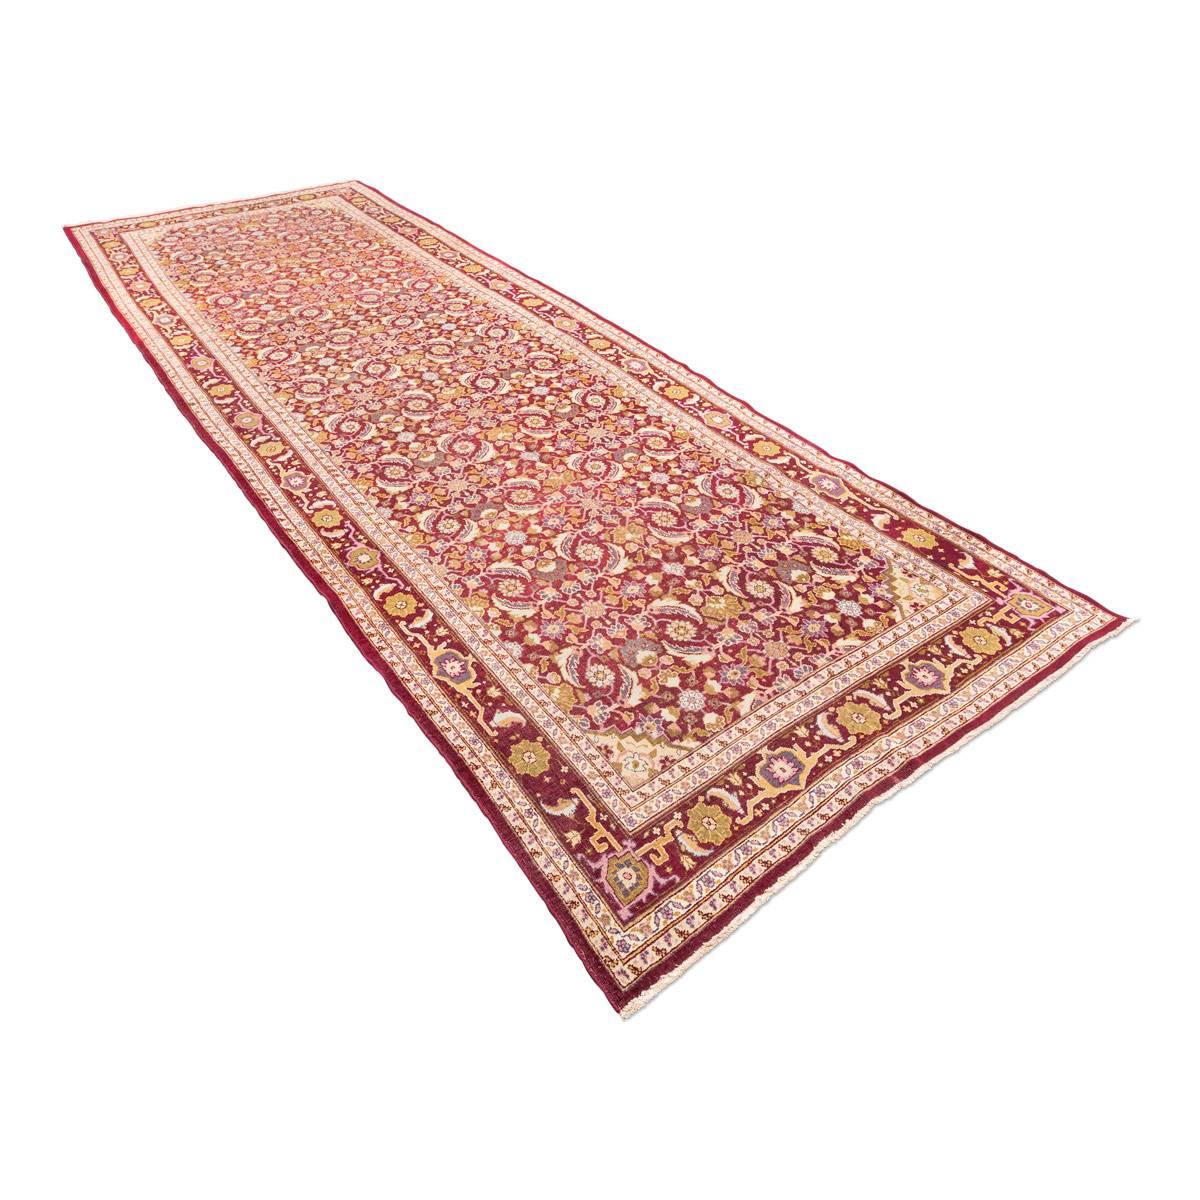 Classic Agra rug from India Agra. Measures: 4,45 x 1,60 m.
- Produced at the end of the 19th century for the English market of the time.
- In its Classic design the influence of Classic rugs is recognized.
- The shades used in burgundy wine are